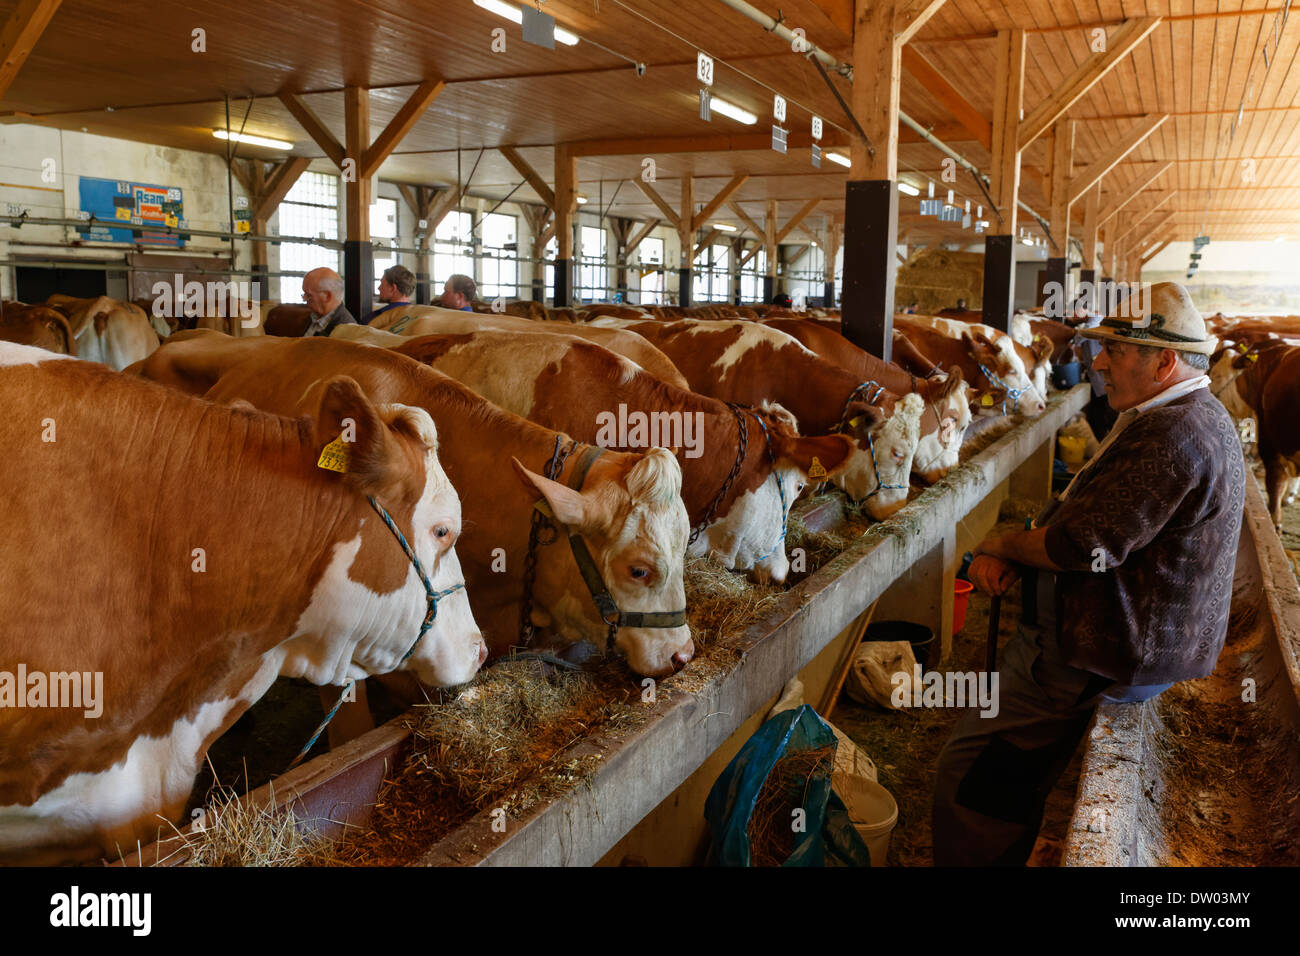 Cattle, cattle market, Oberlandhalle hall, Miesbach, Upper Bavaria, Bavaria, Germany Stock Photo